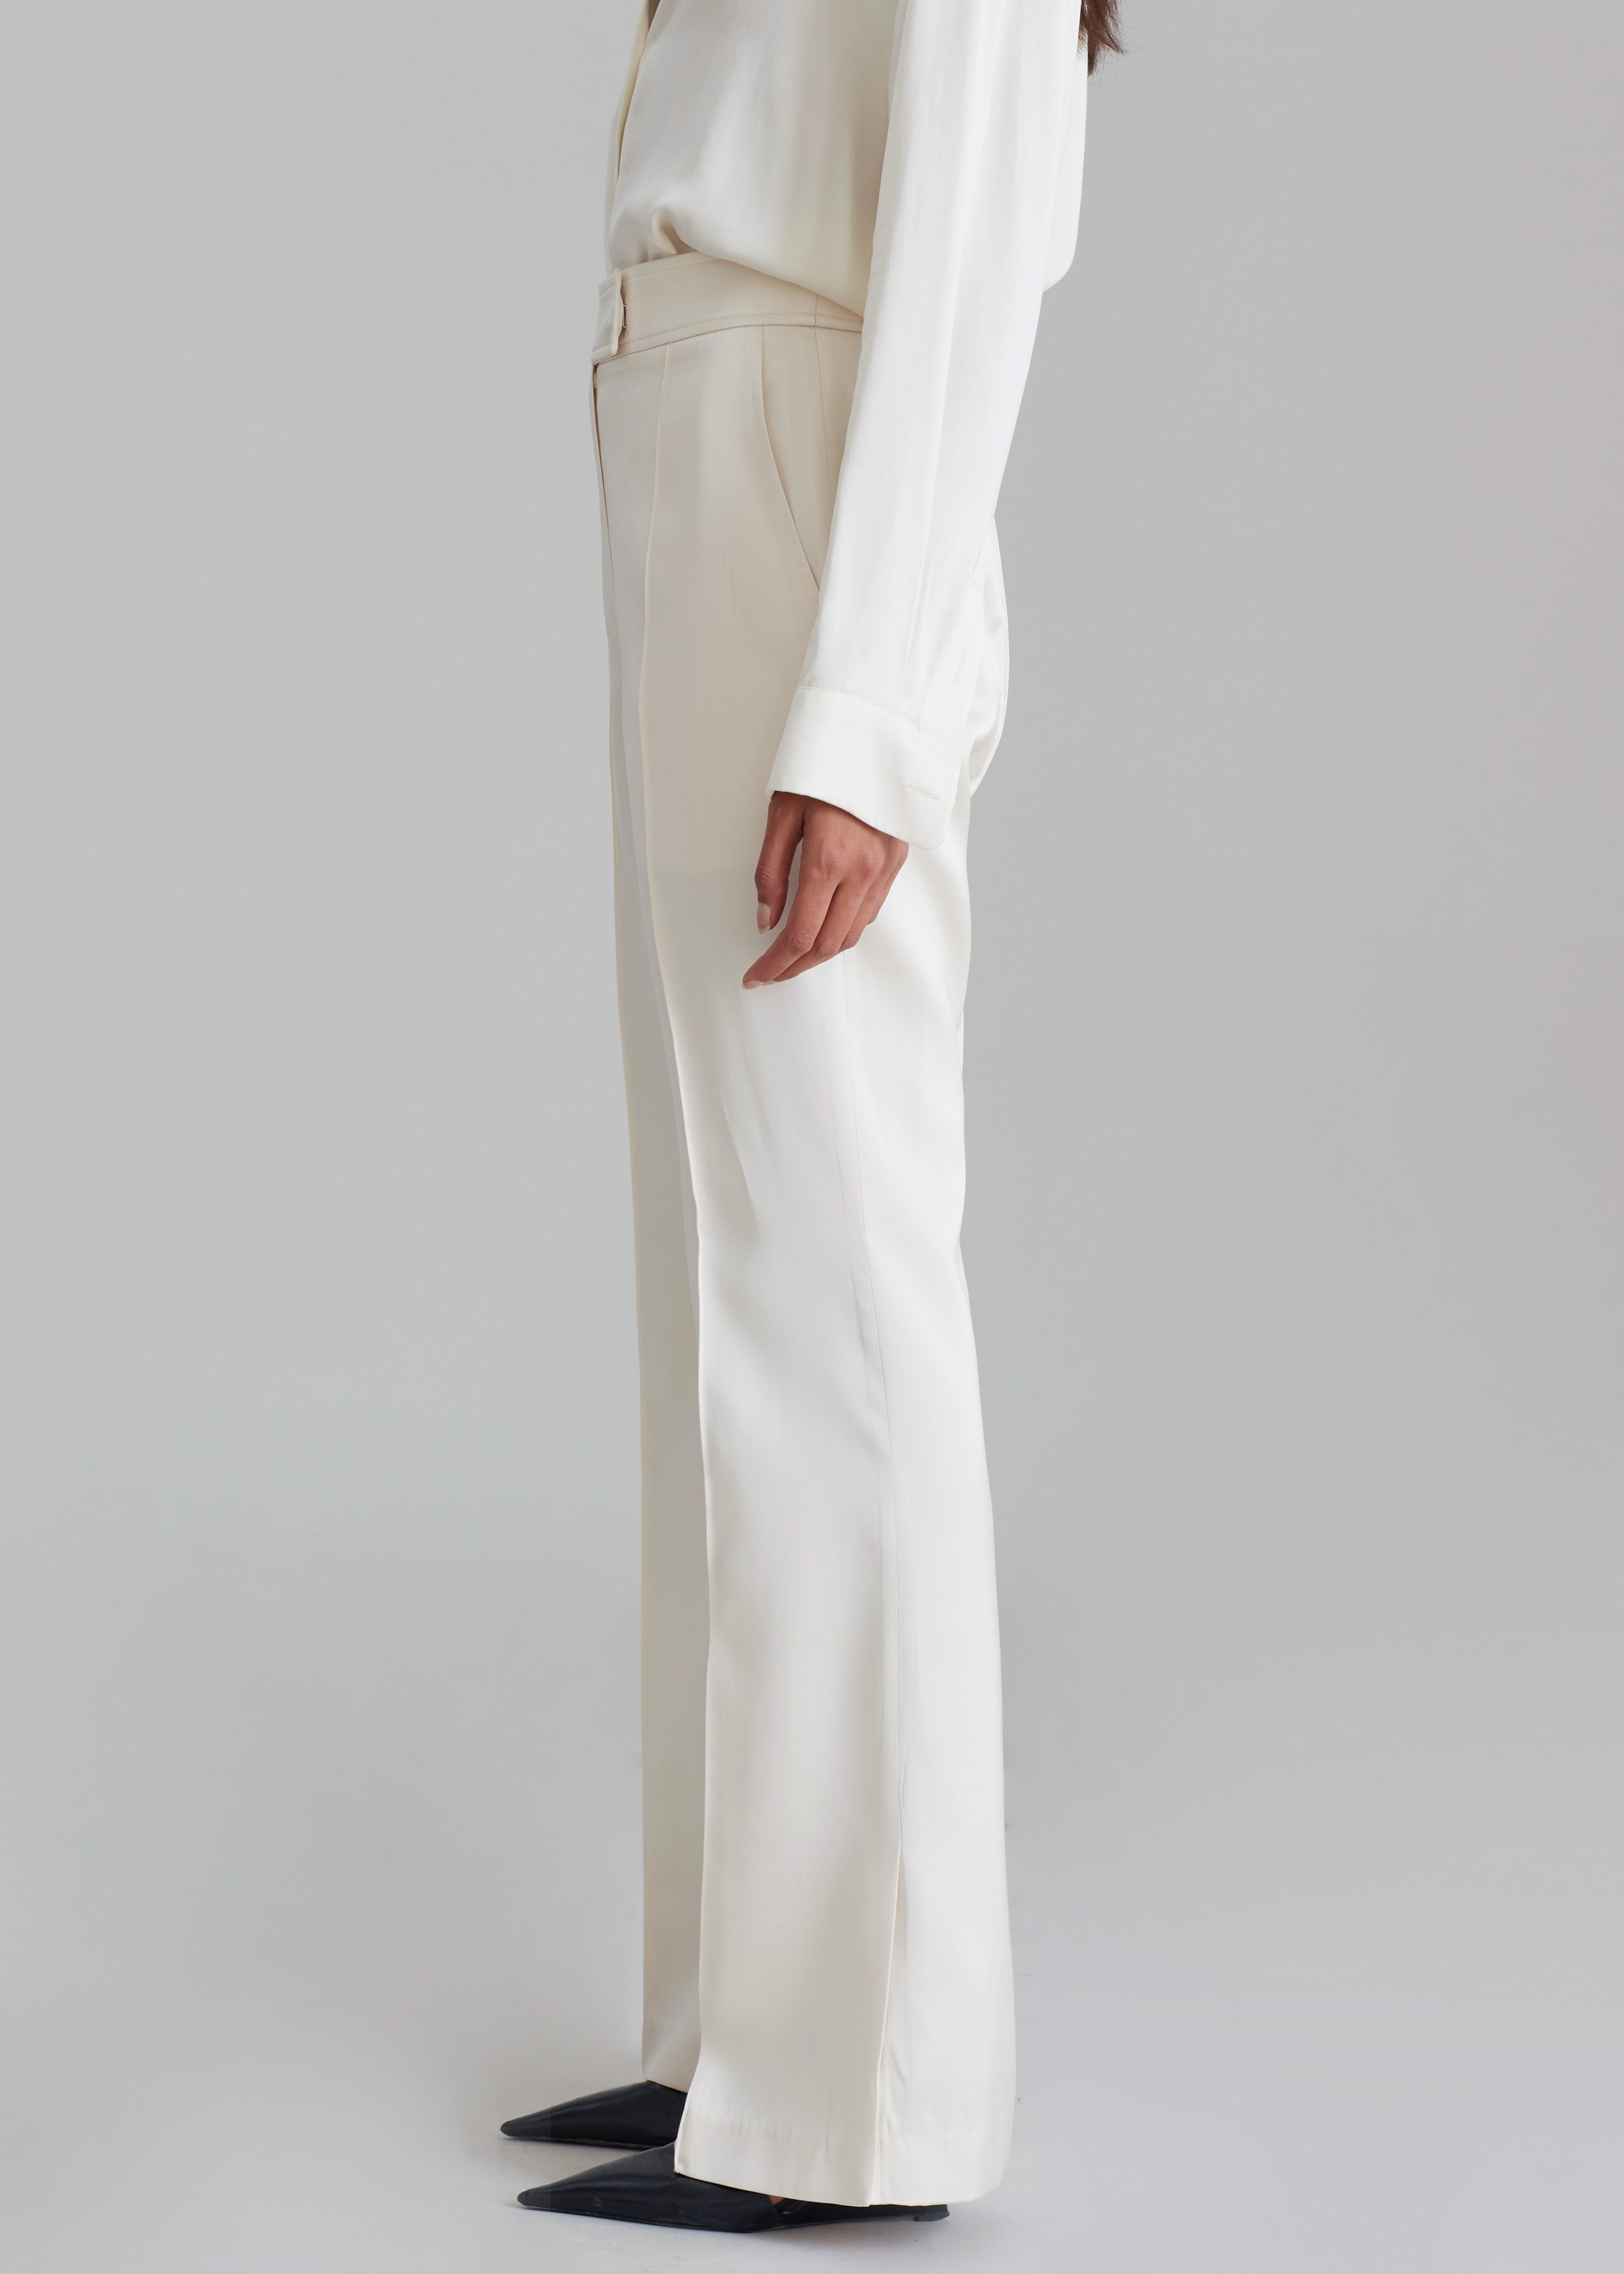 Angelica Flare Pants - Ivory - 8